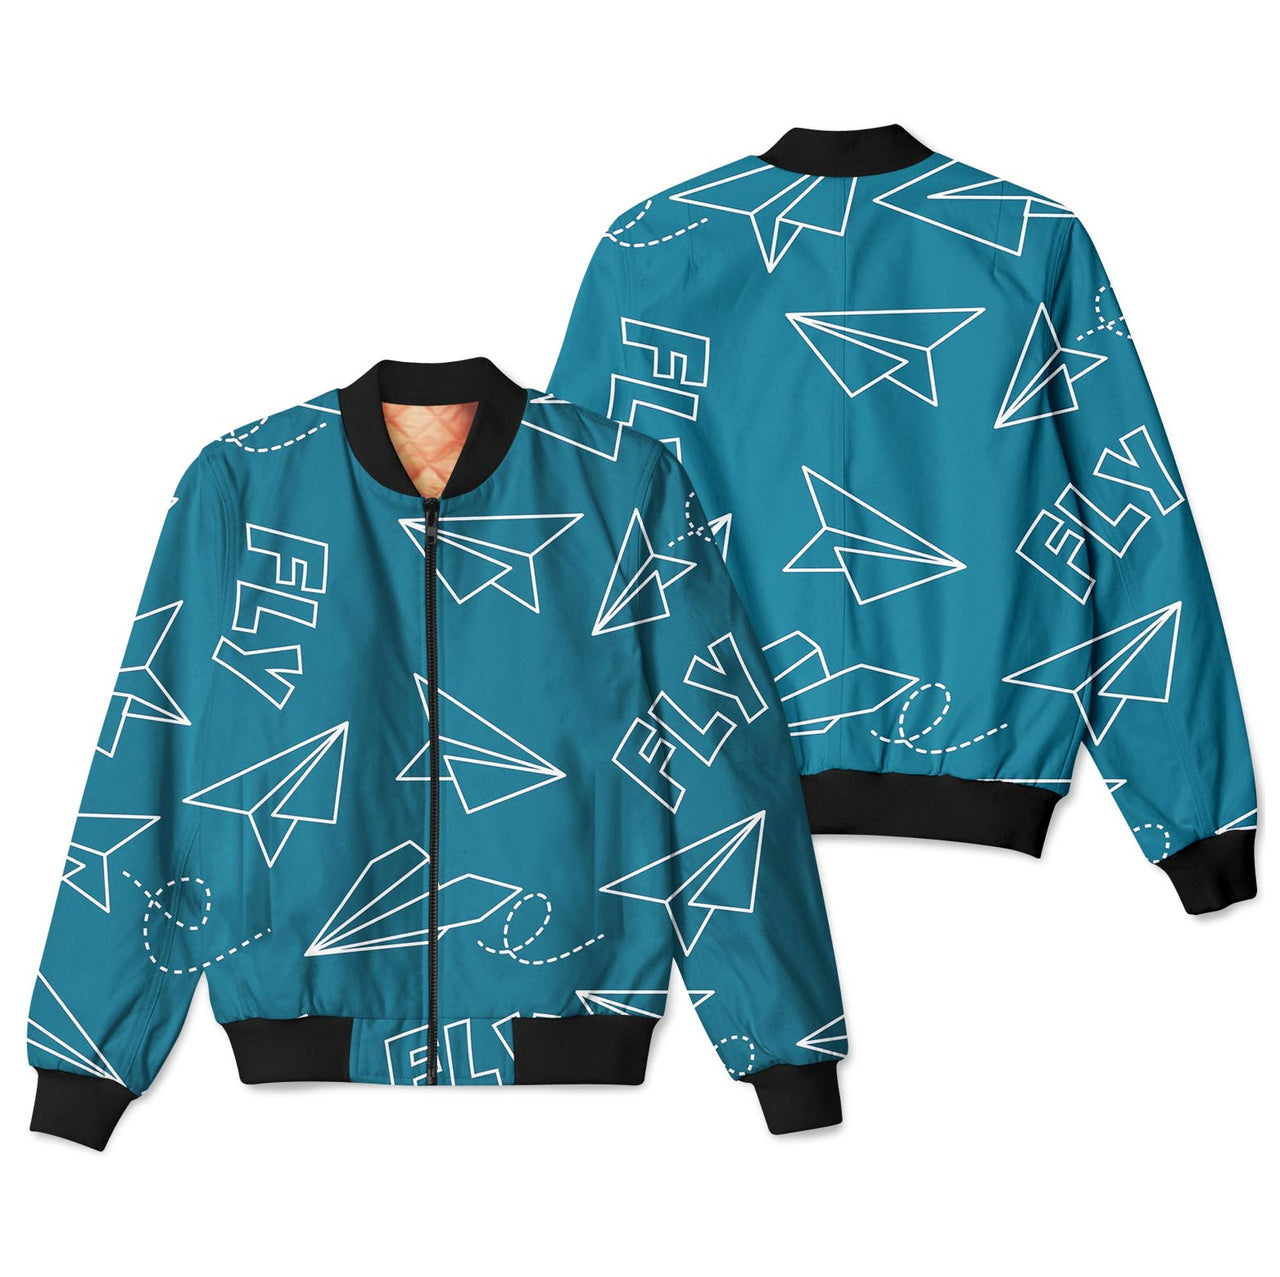 Paper Airplane & Fly Designed 3D Pilot Bomber Jackets